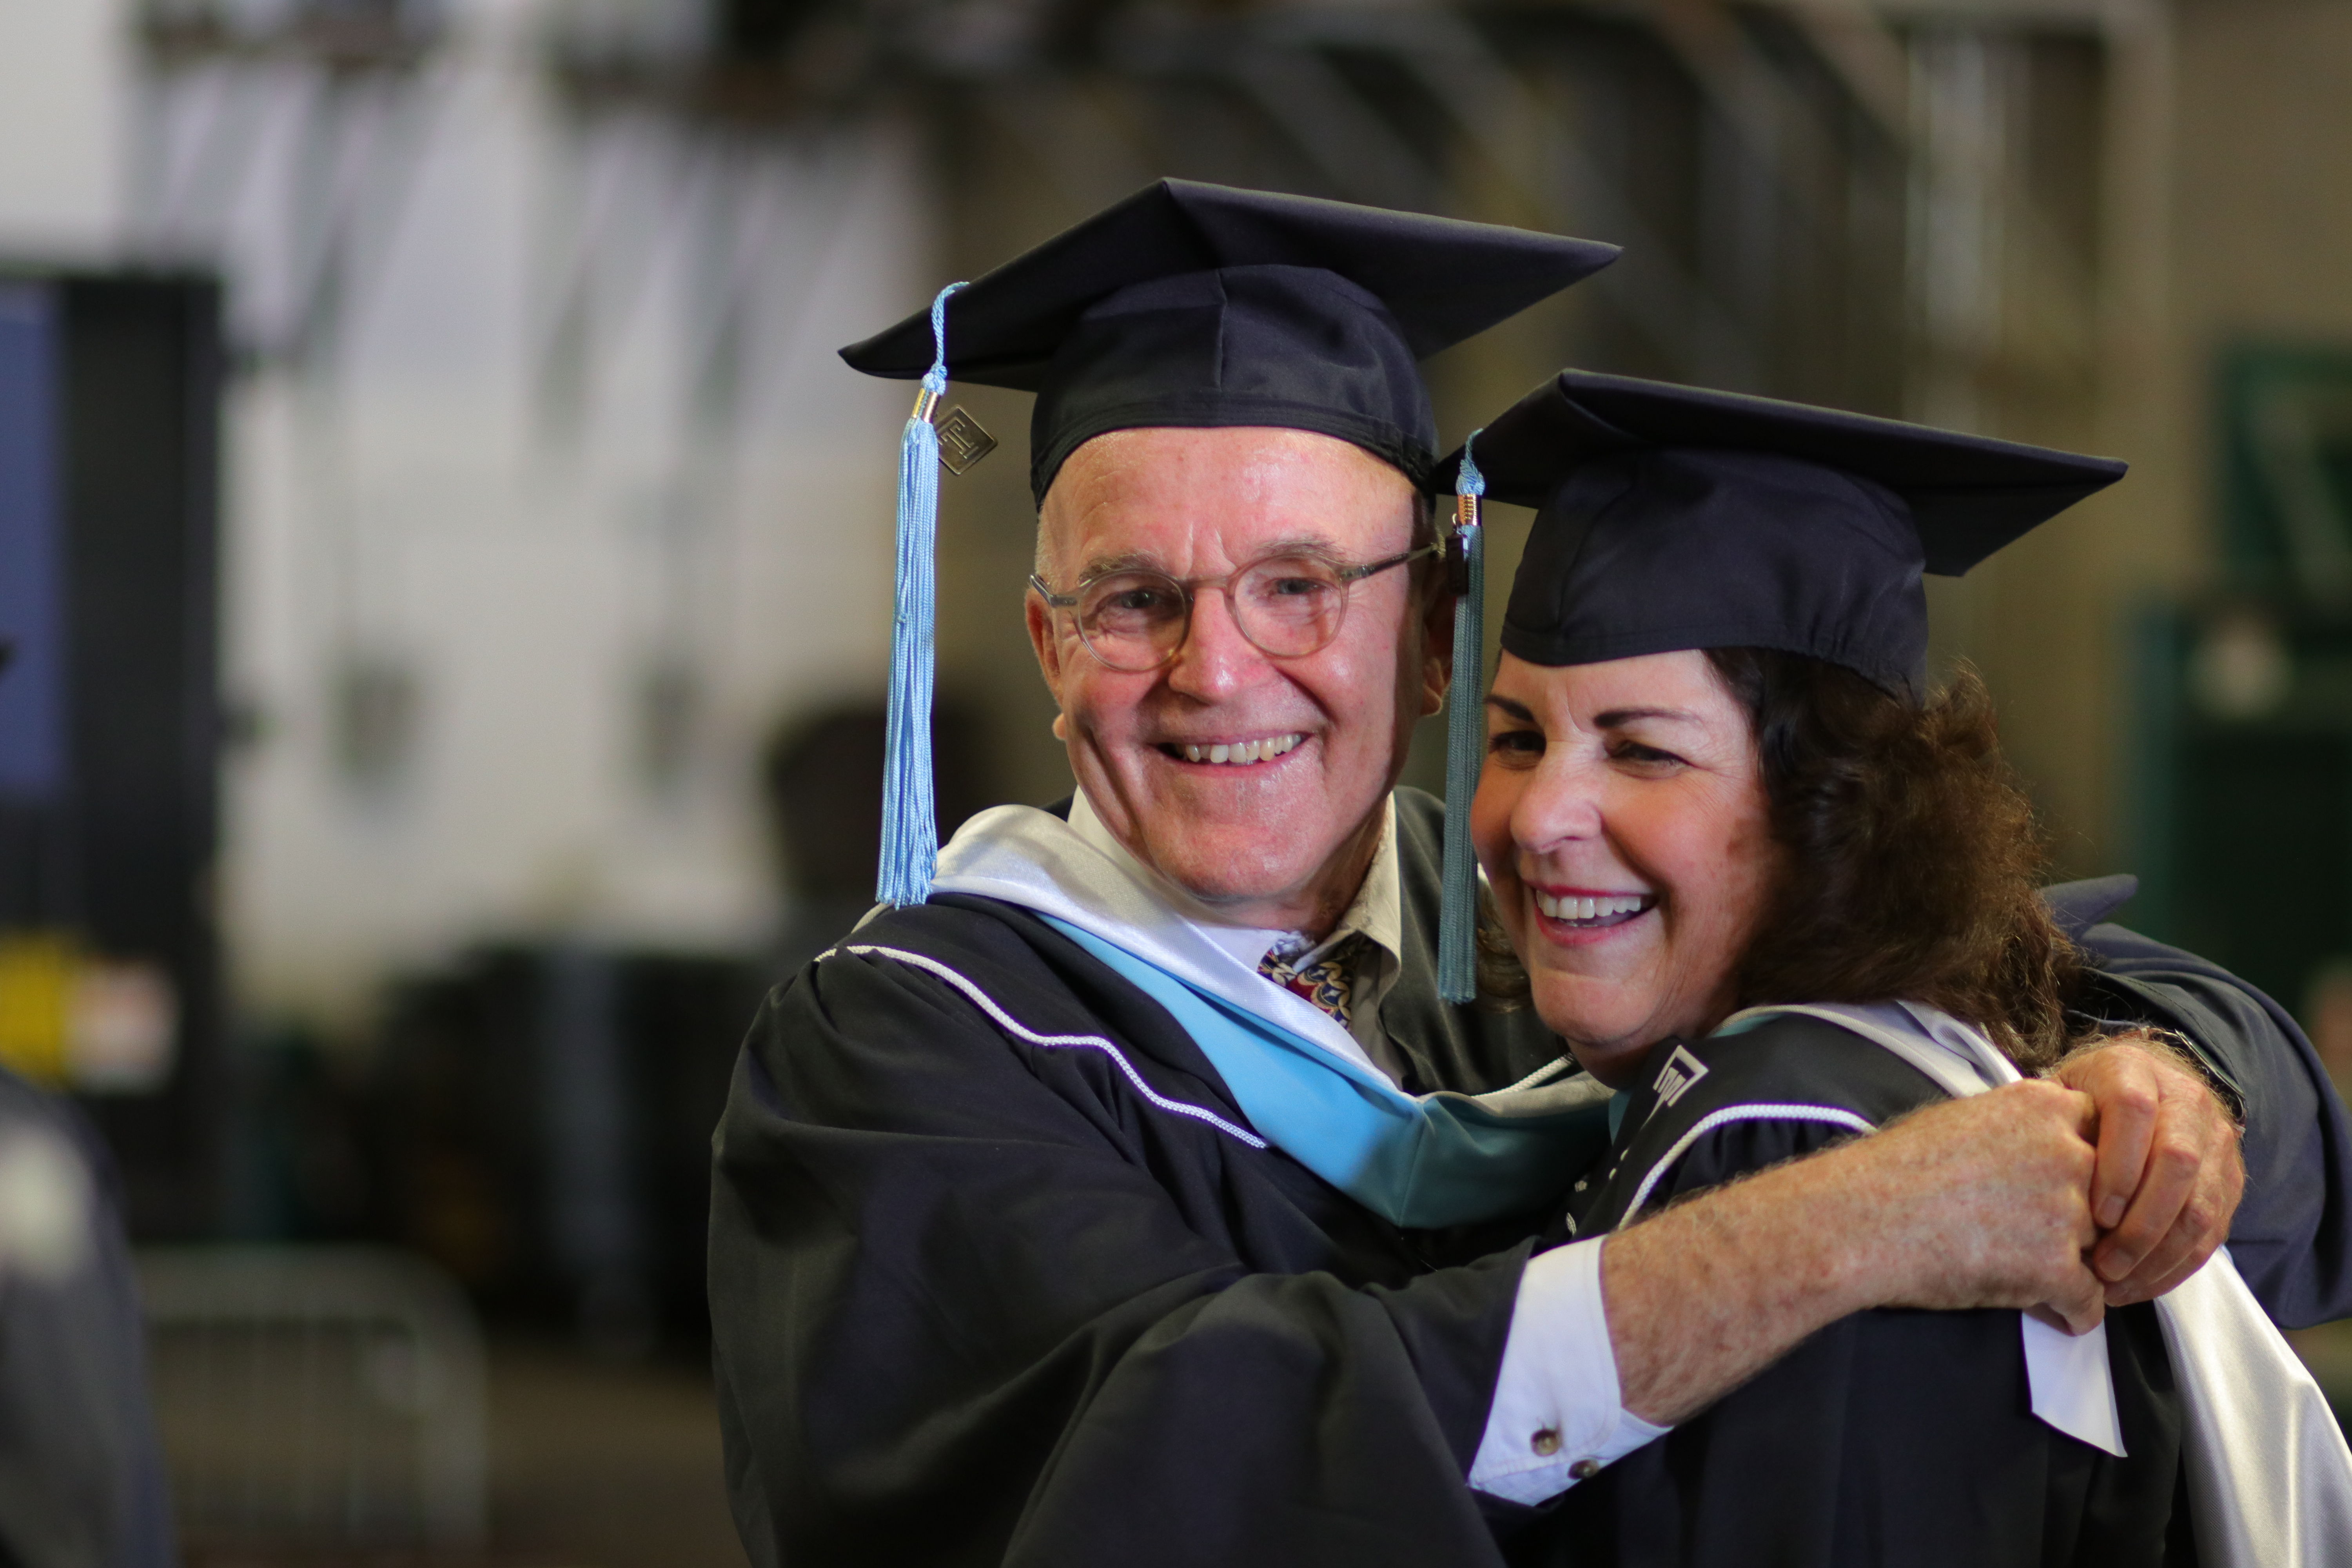 Two graduating students embrace